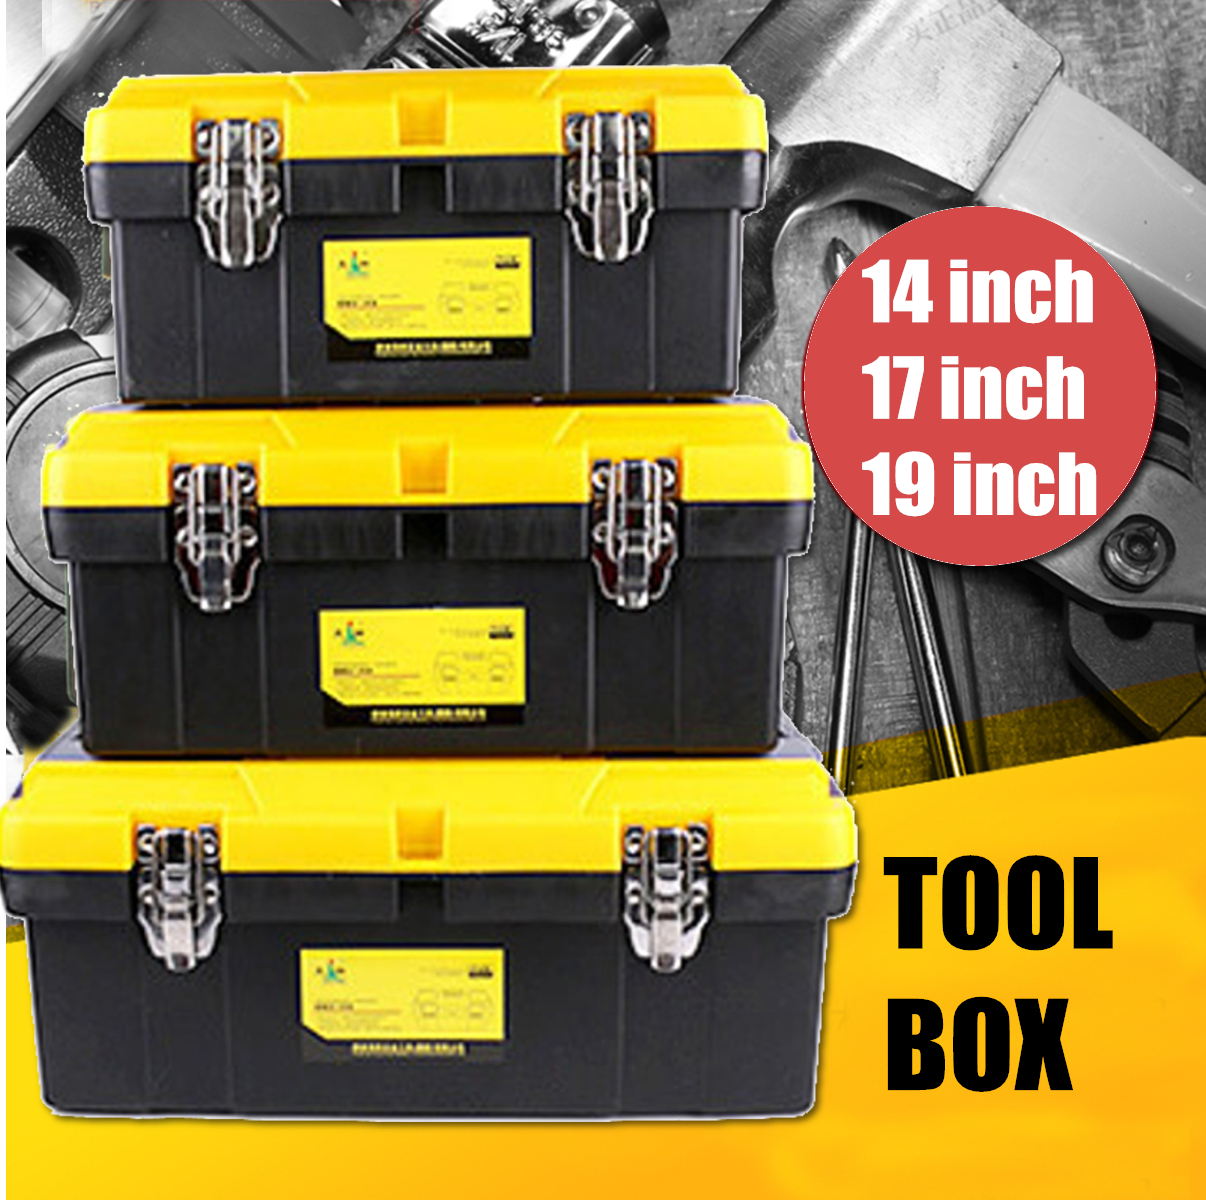 141719-Inch-Plastic-Work-Tools-Storage-Box-Protable-Carrying-Case-Handle-Accessories-Holder-1321332-1